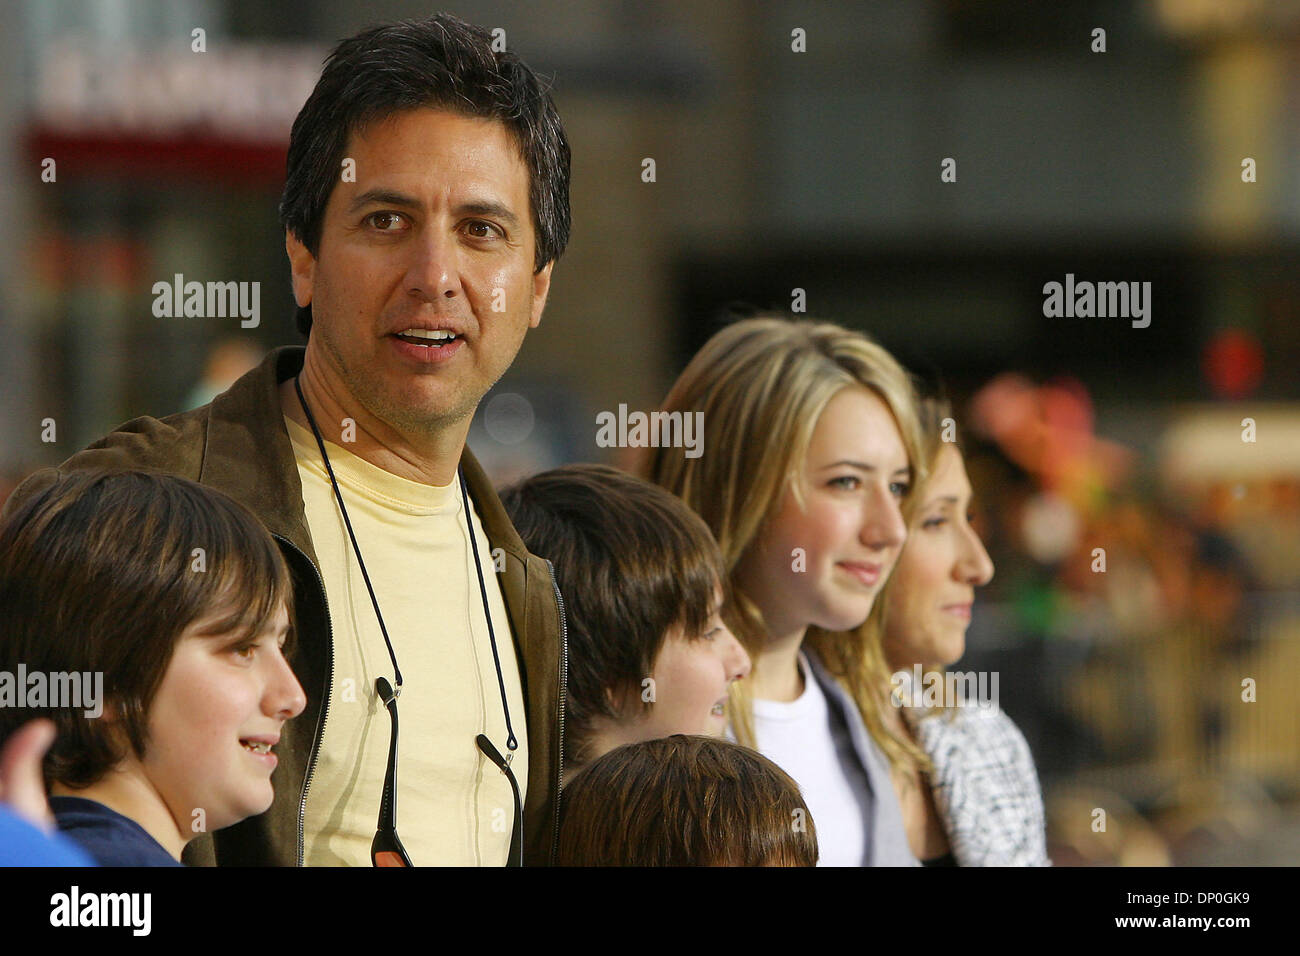 Mar 19, 2006; Hollywood, CA, USA; RAY ROMANO and family during arrivals at the Hollywood premiere of 'Ice Age: The Meltdown' held at the Mann Grauman Chinese Theater. Mandatory Credit: Photo by Jerome Ware/ZUMA Press. (©) Copyright 2006 by Jerome Ware Stock Photo